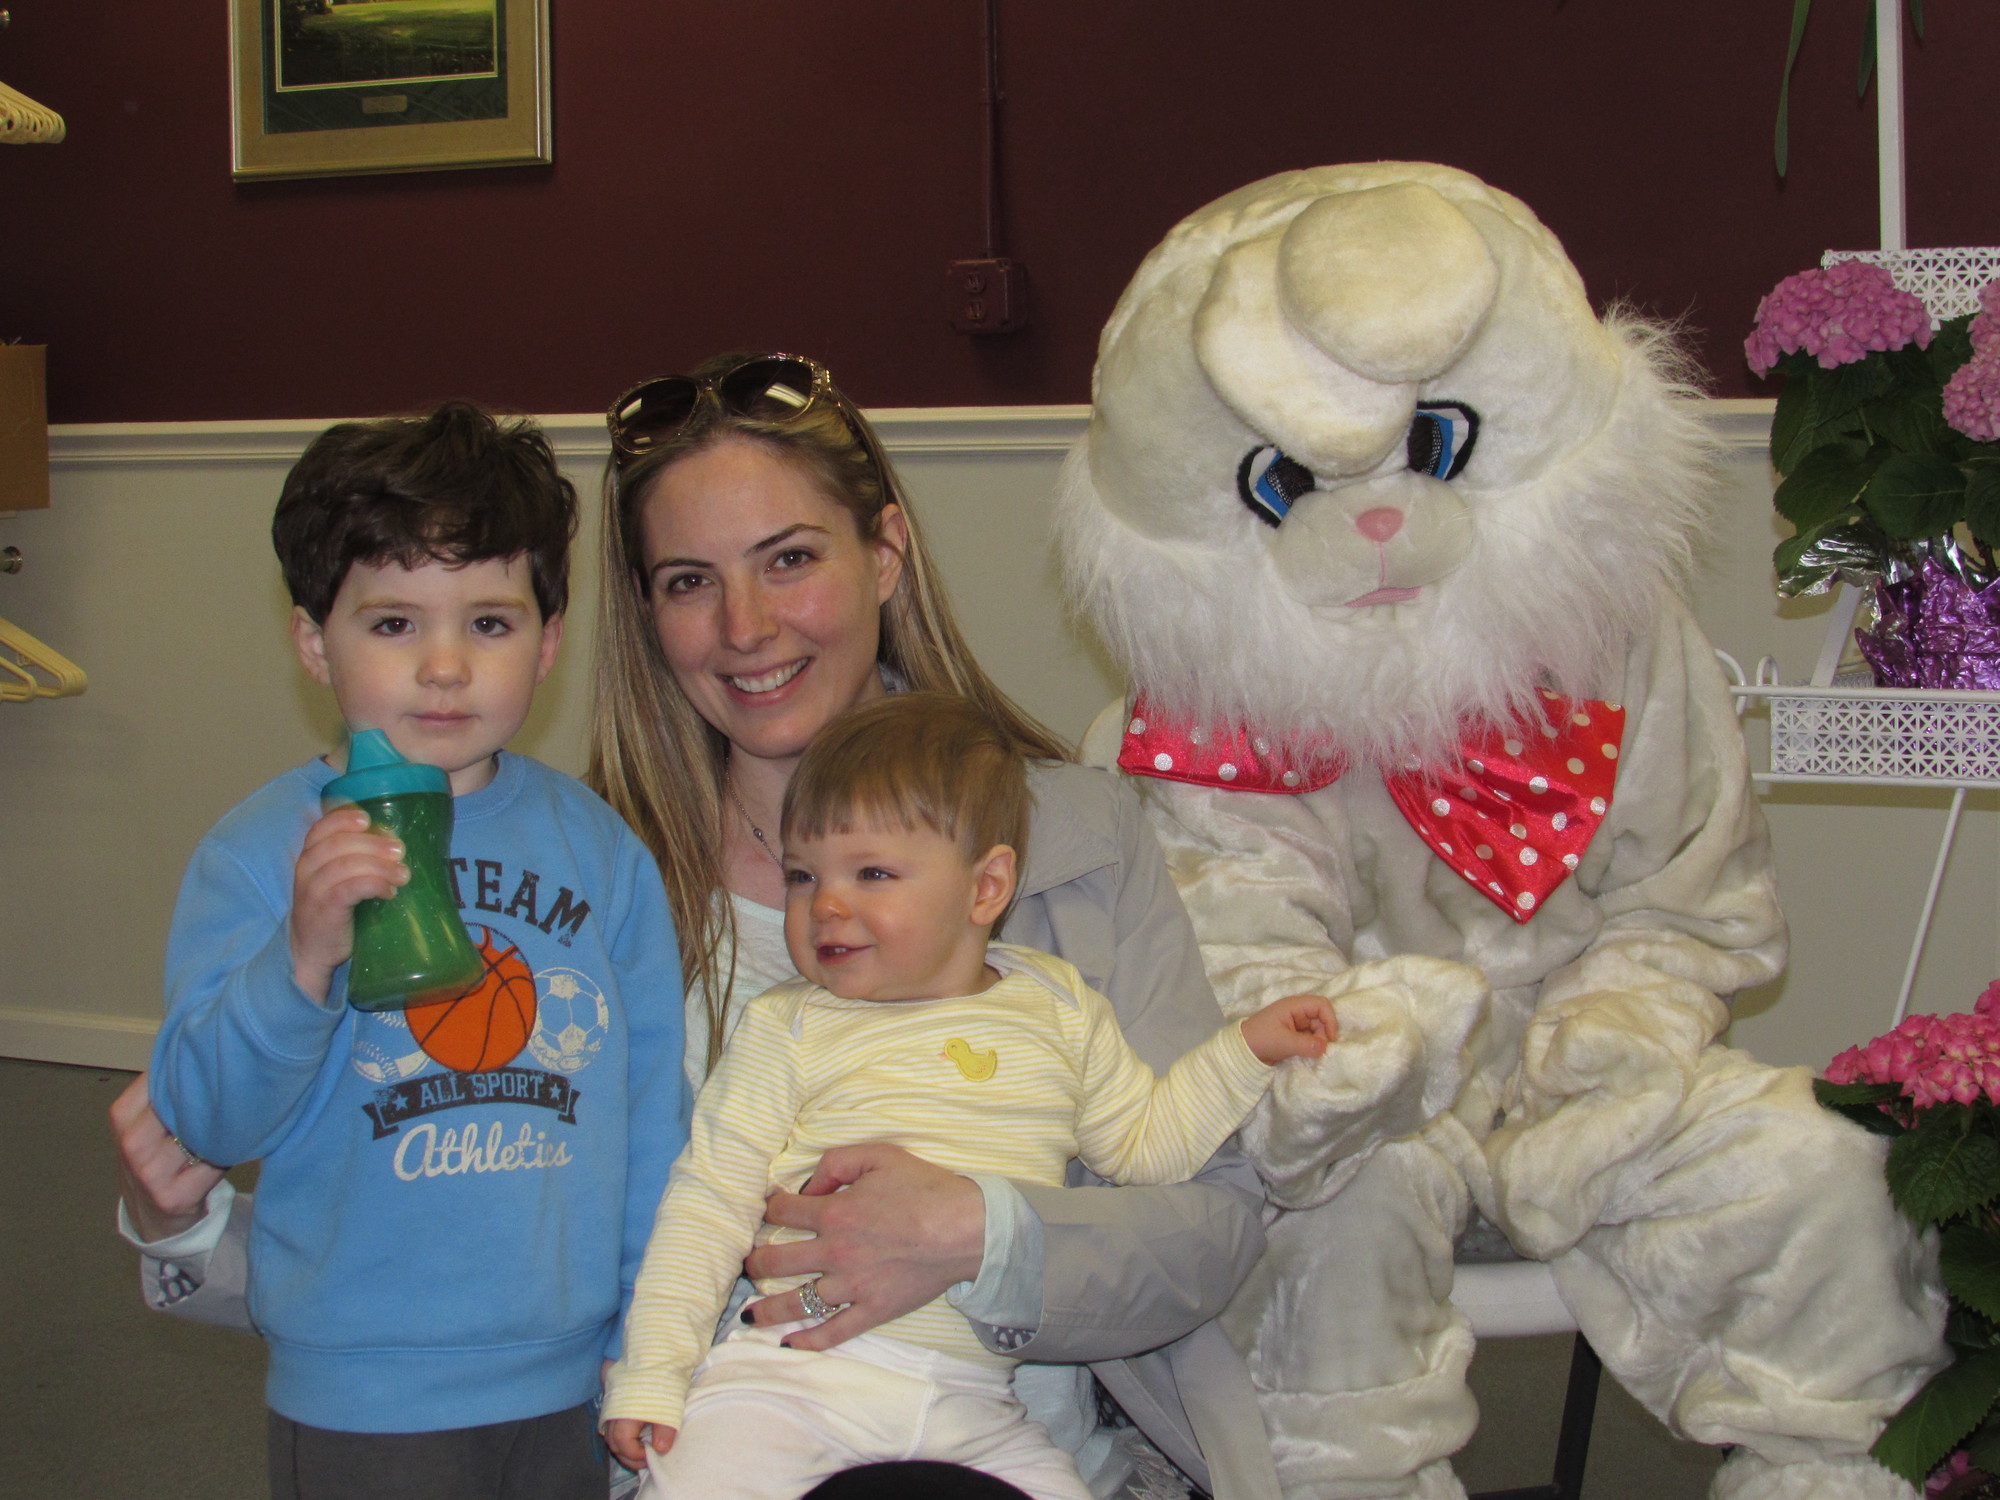 Dana Tozzi visited the Easter Bunny with her children, Colton, 3, and Declan, 10 months.